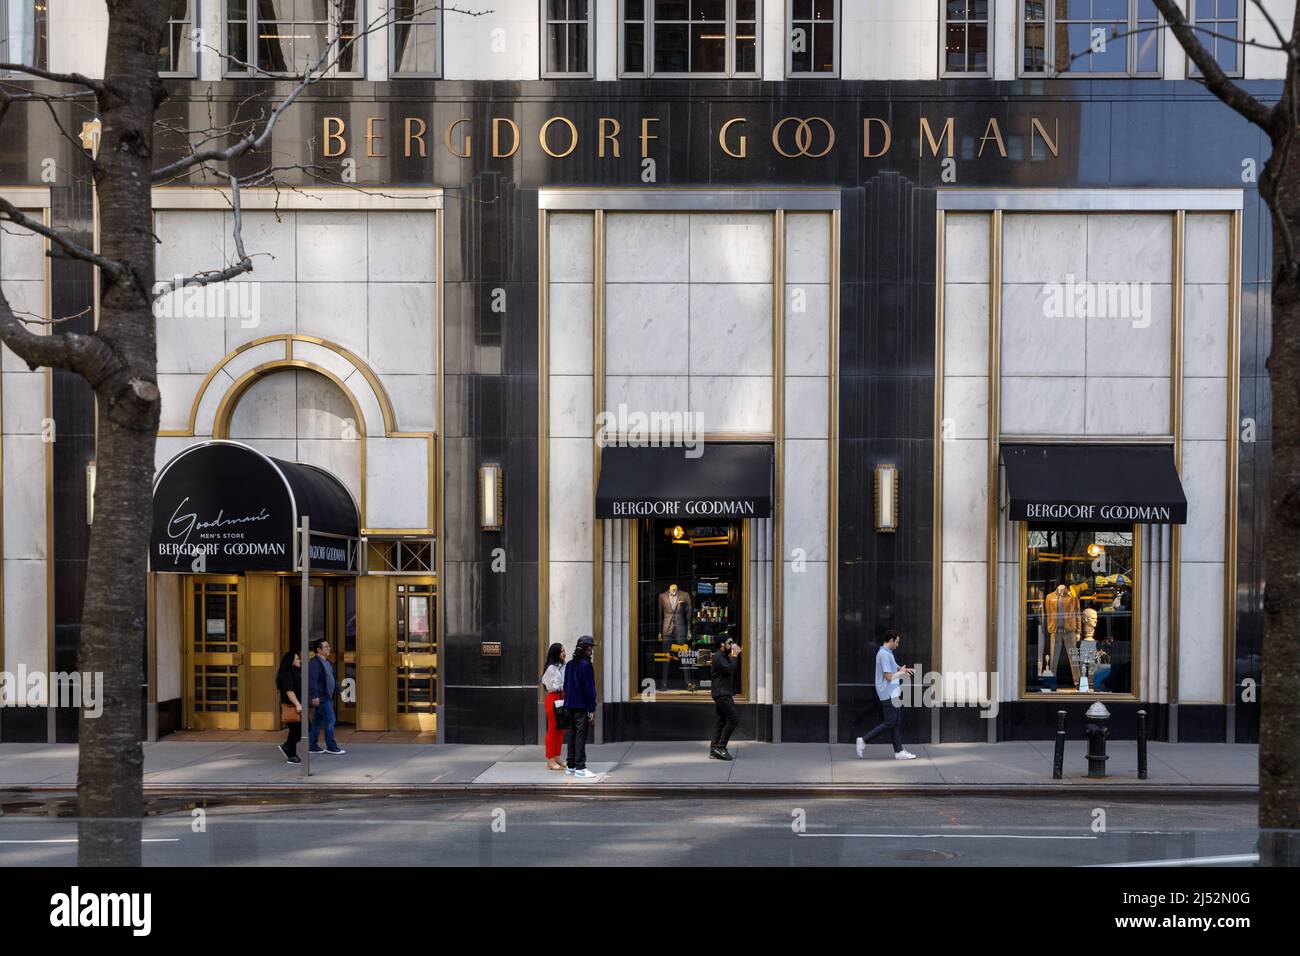 Bergdorf Goodman luxury clothing, pioneered ready-to-wear, flagship store, Fifth Avenue, New York, NY, USA. Stock Photo